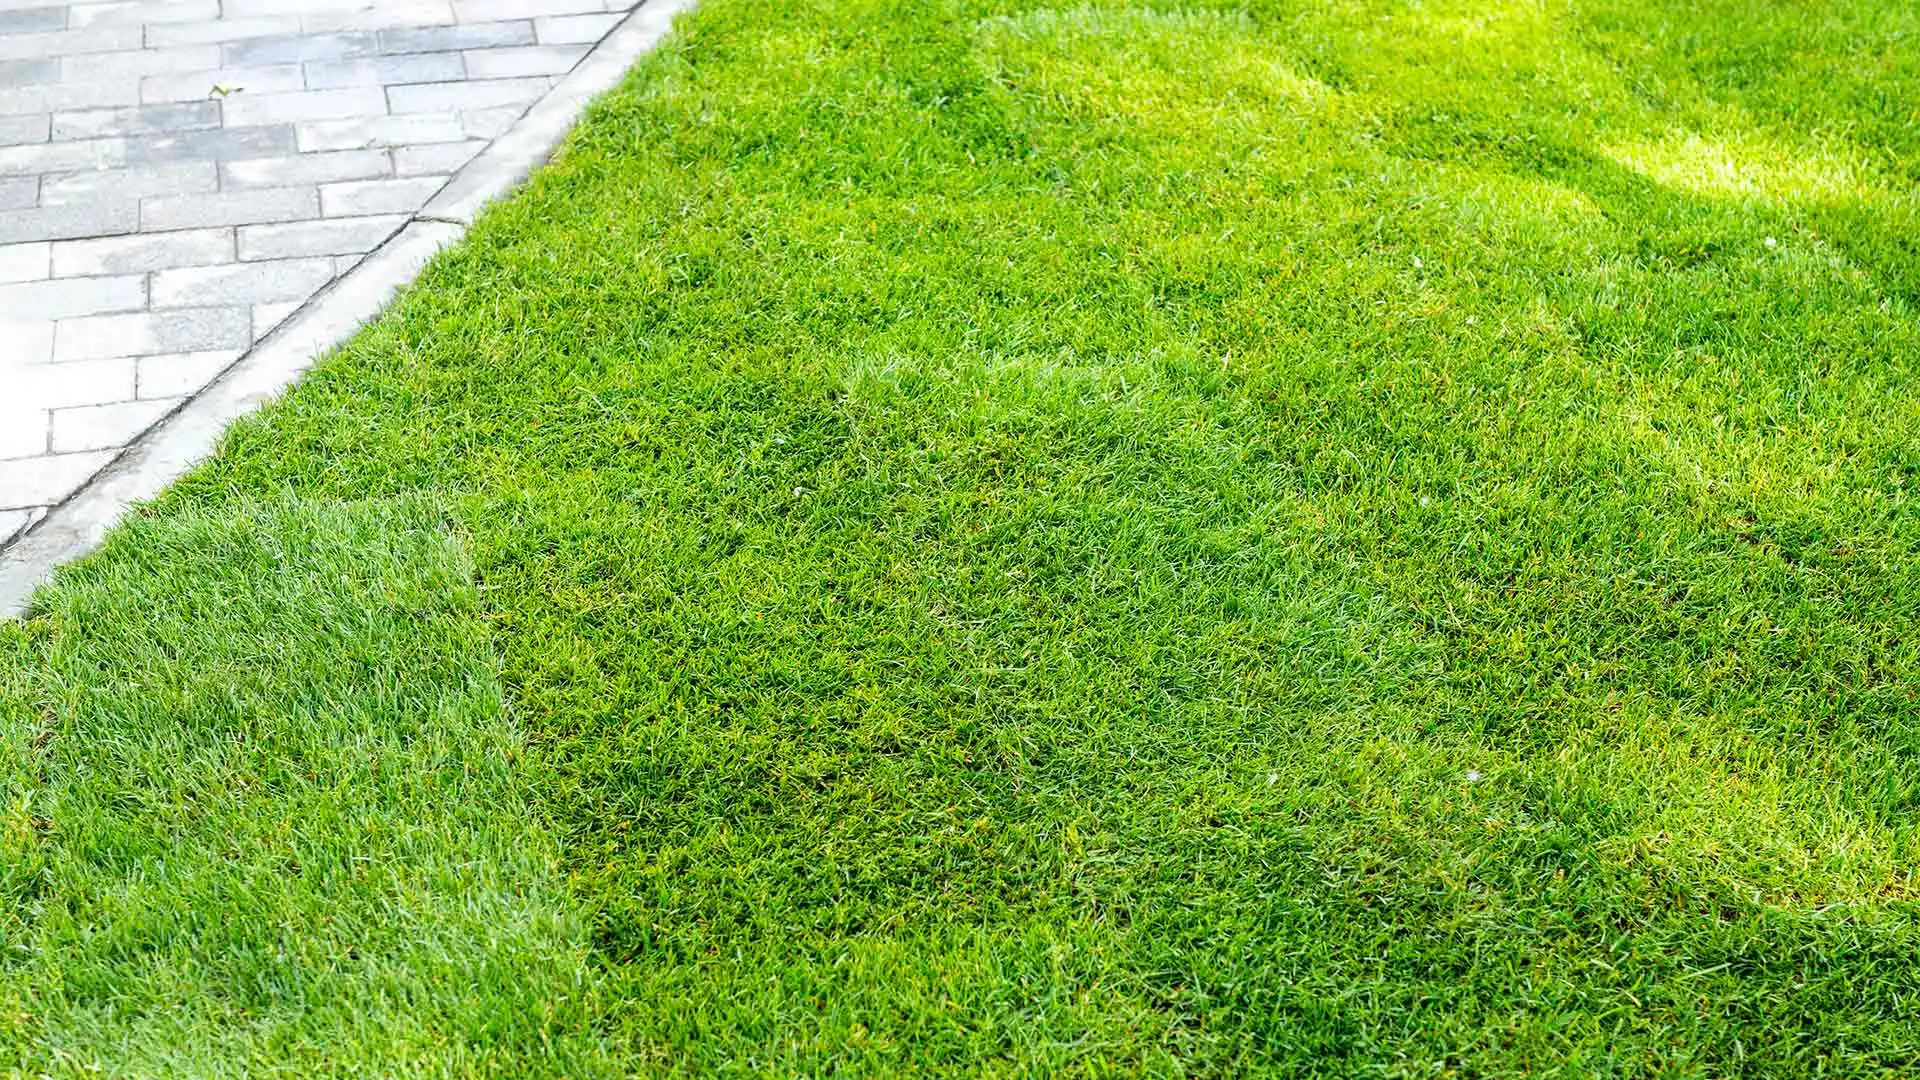 Sod vs Seeds? Which Method Should You Choose to Establish Your New Lawn?